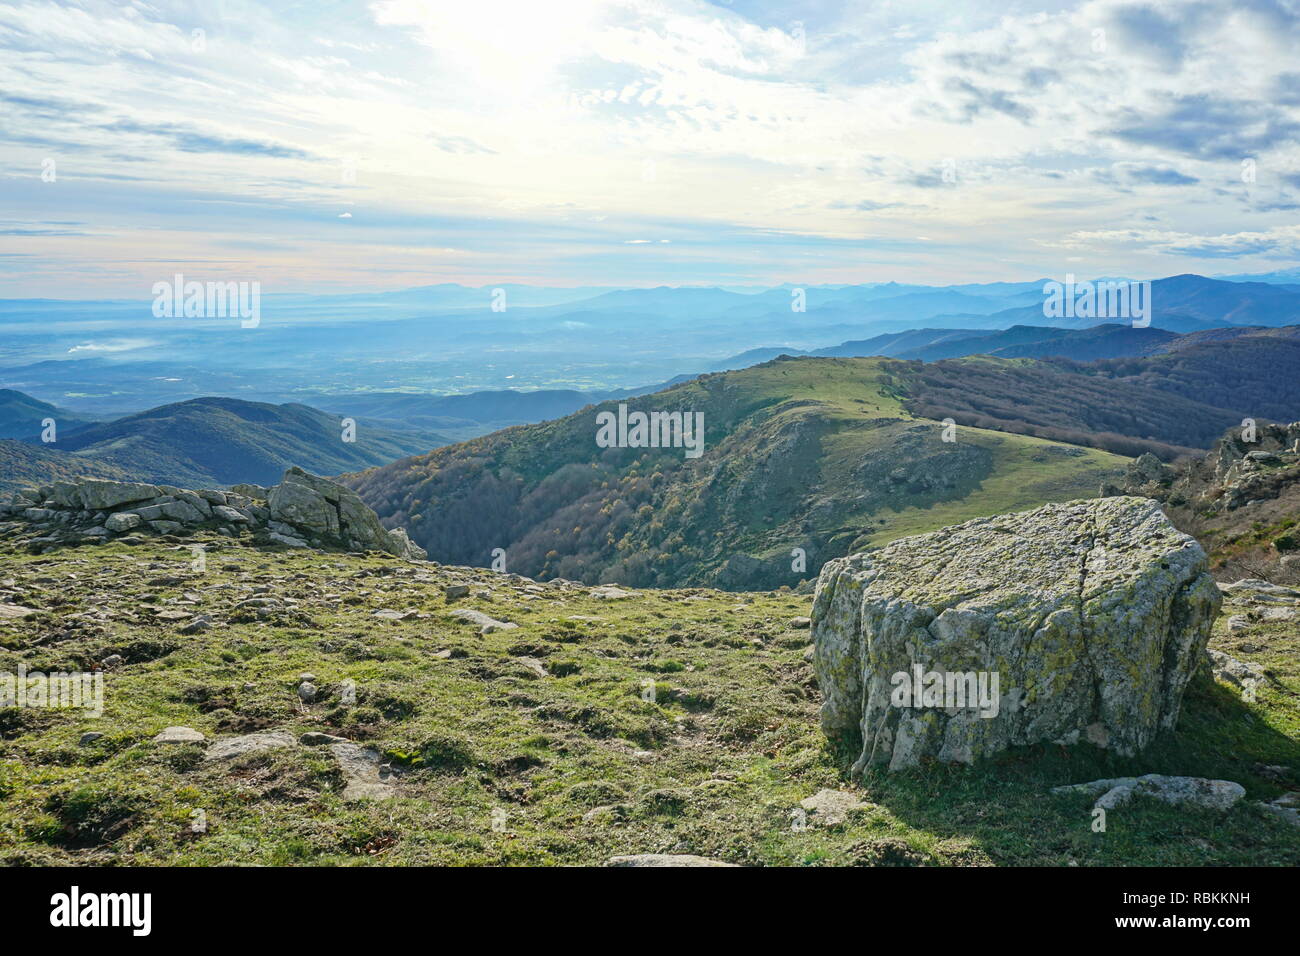 Landscape from the top of the Albera mountain range at the border between Spain and France, Pyrenees, Catalonia, Alt Emporda Stock Photo